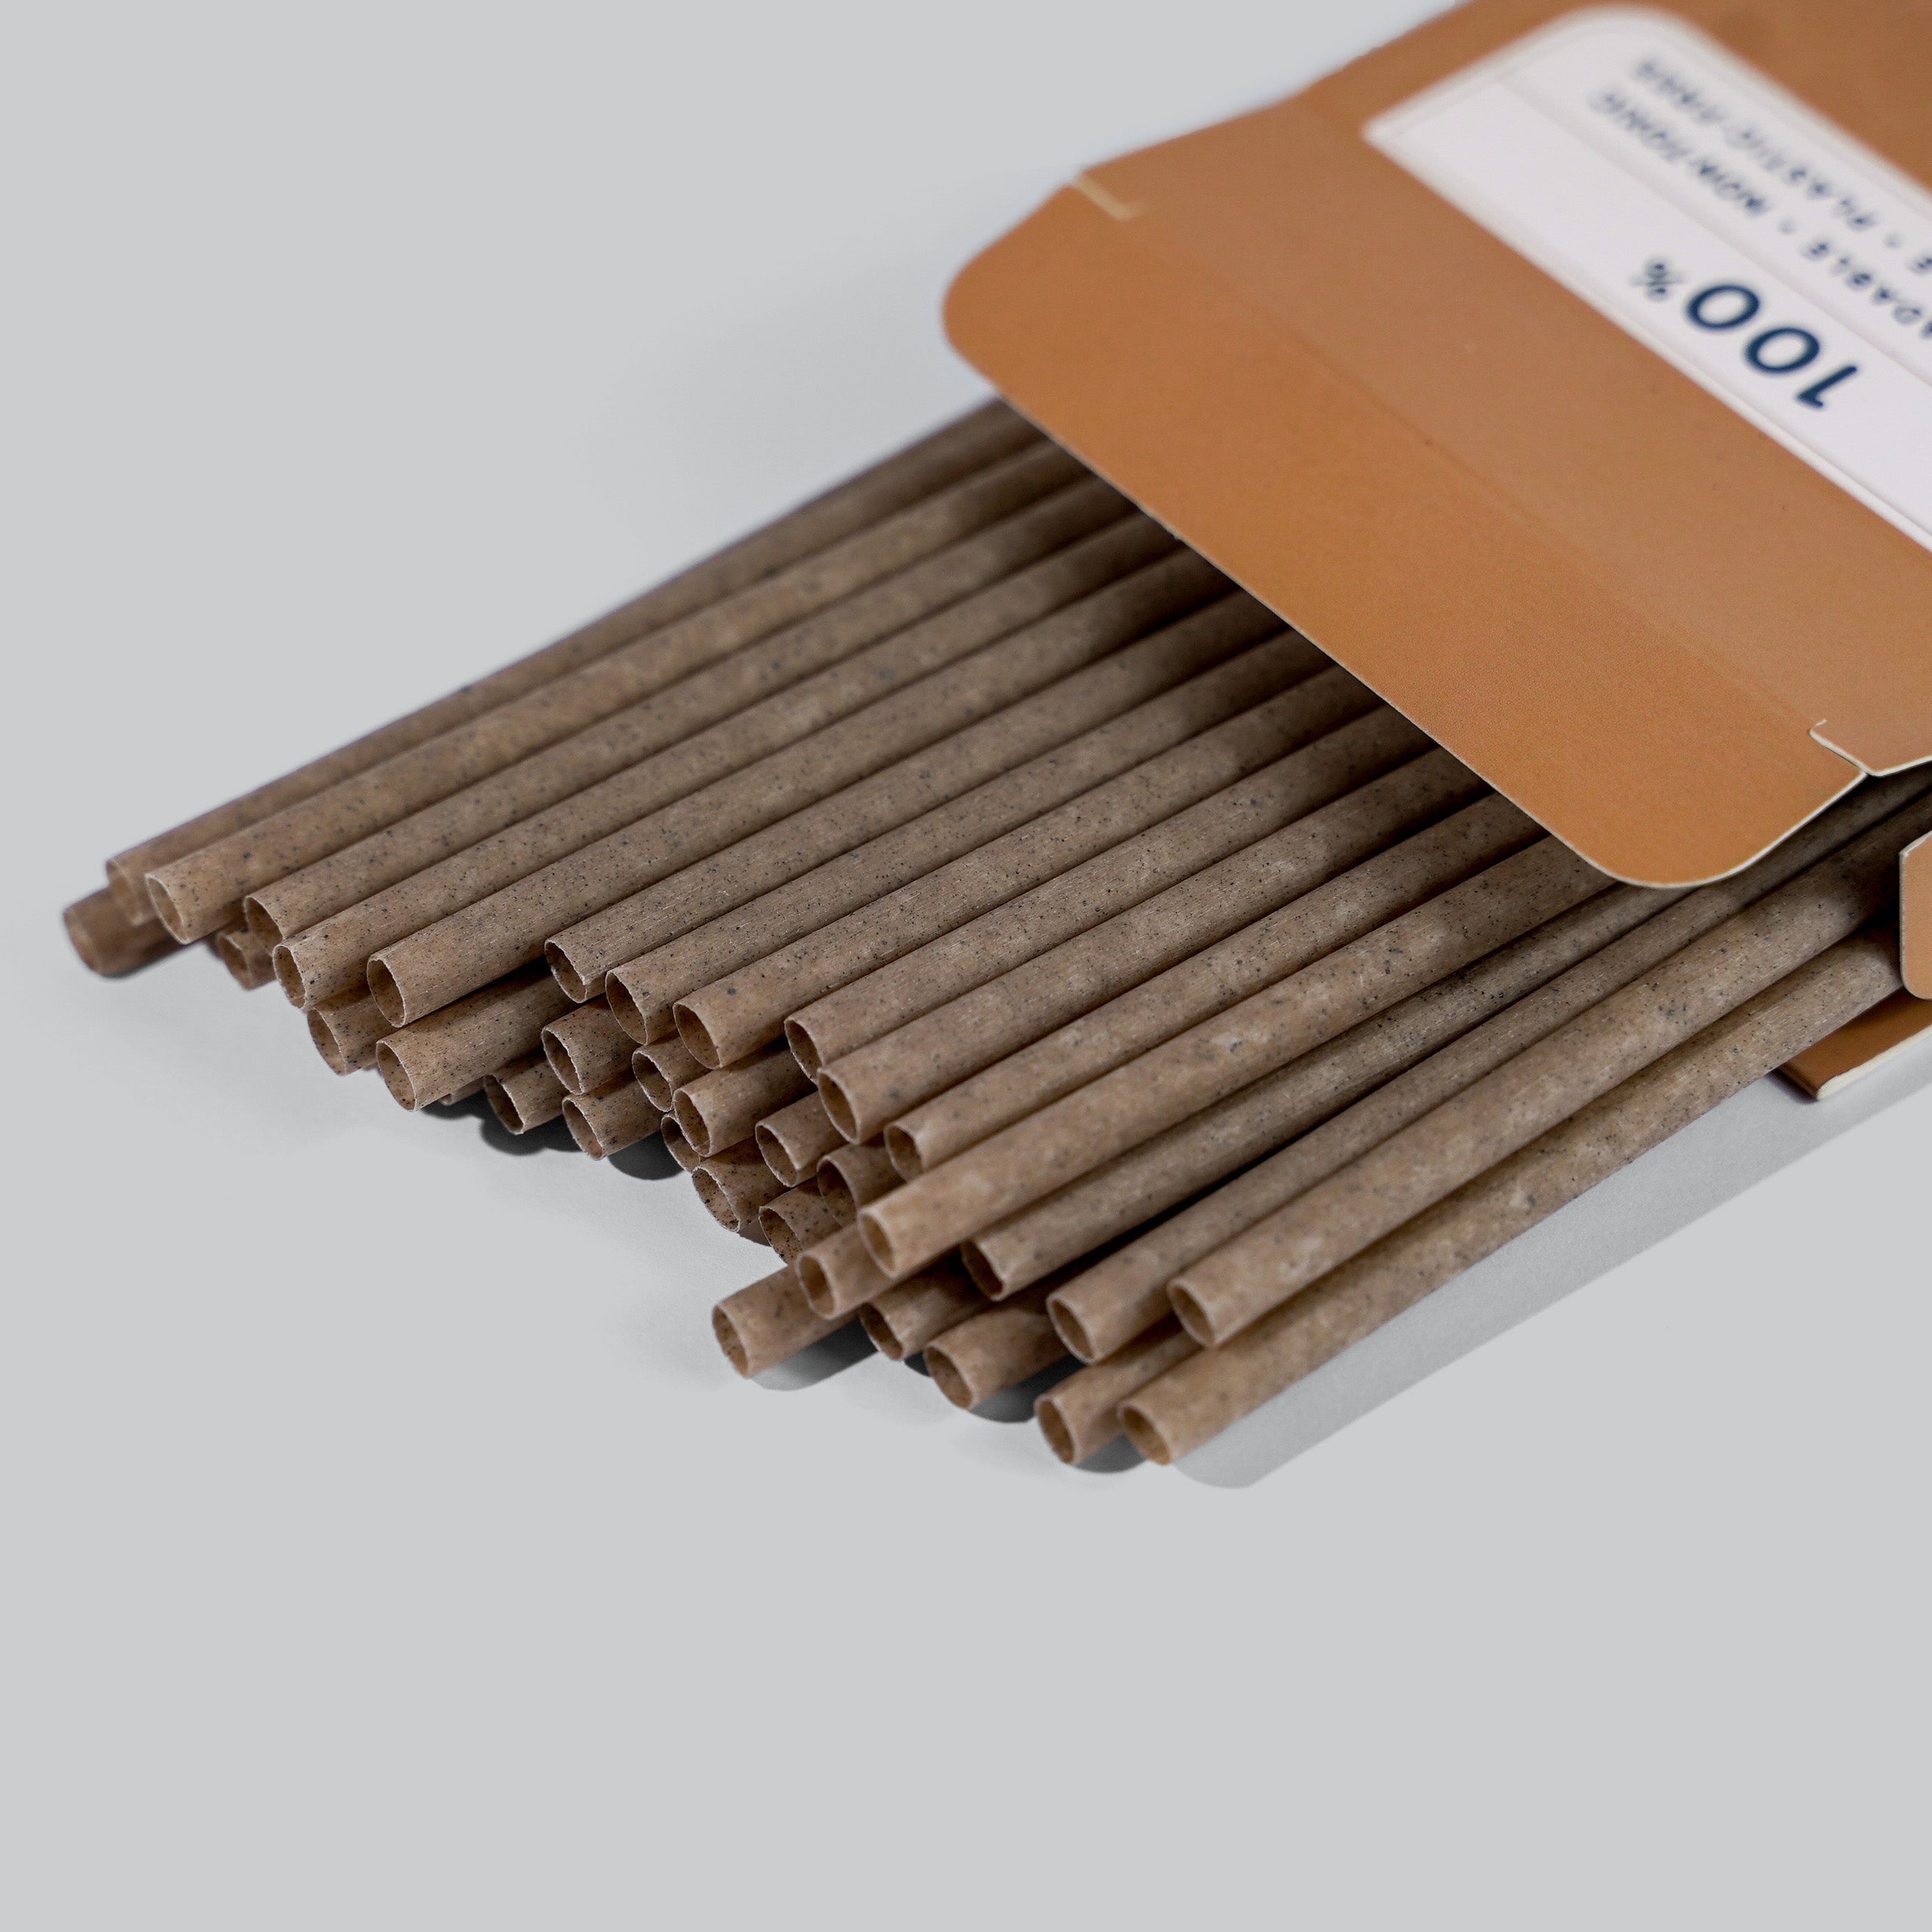 Coffee Drinking Straws by EQUO